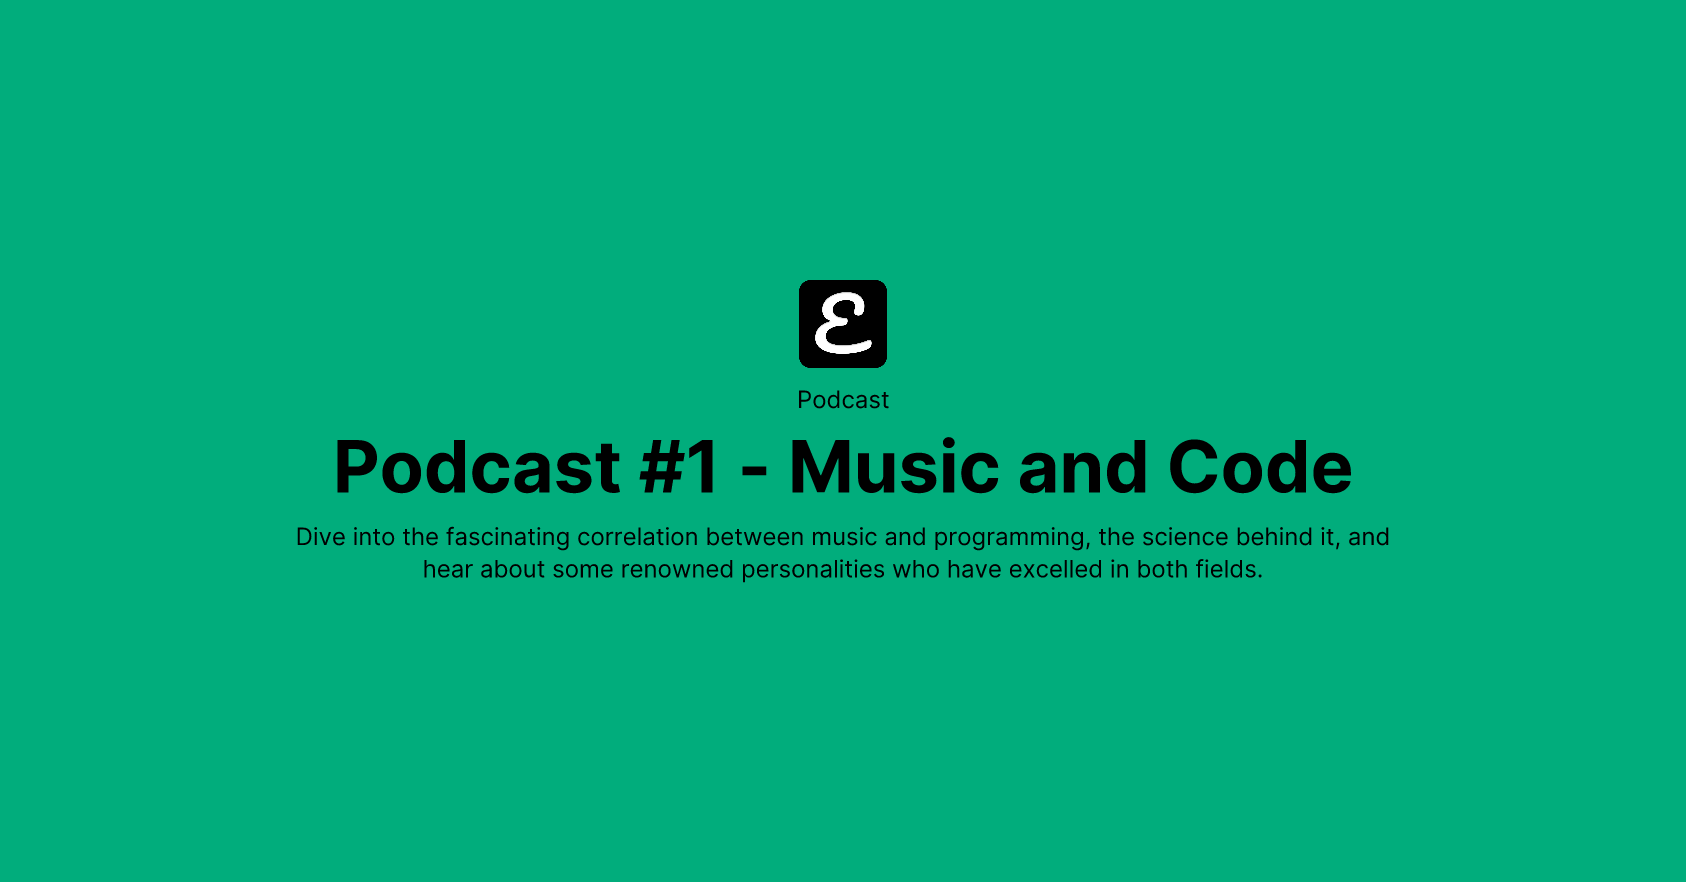 Podcast #1 - Music and Code by Eric David Smith